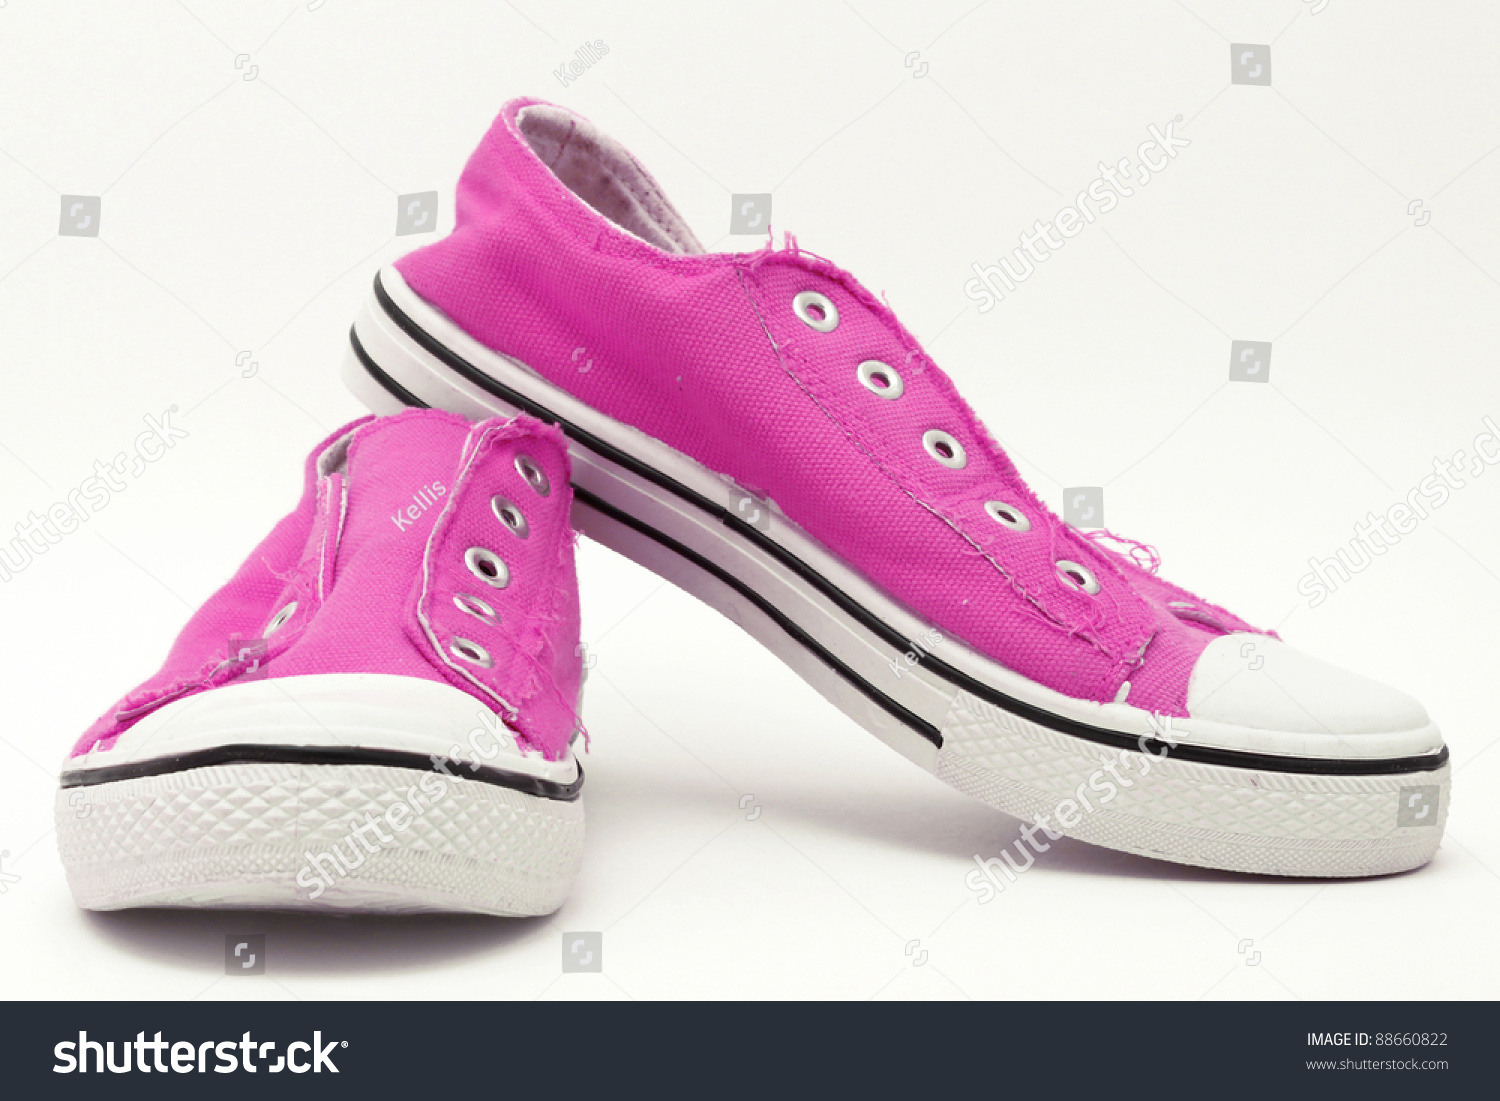 Brand New Pair Of Hot Pink Sneakers On A White Background Stock Photo ...